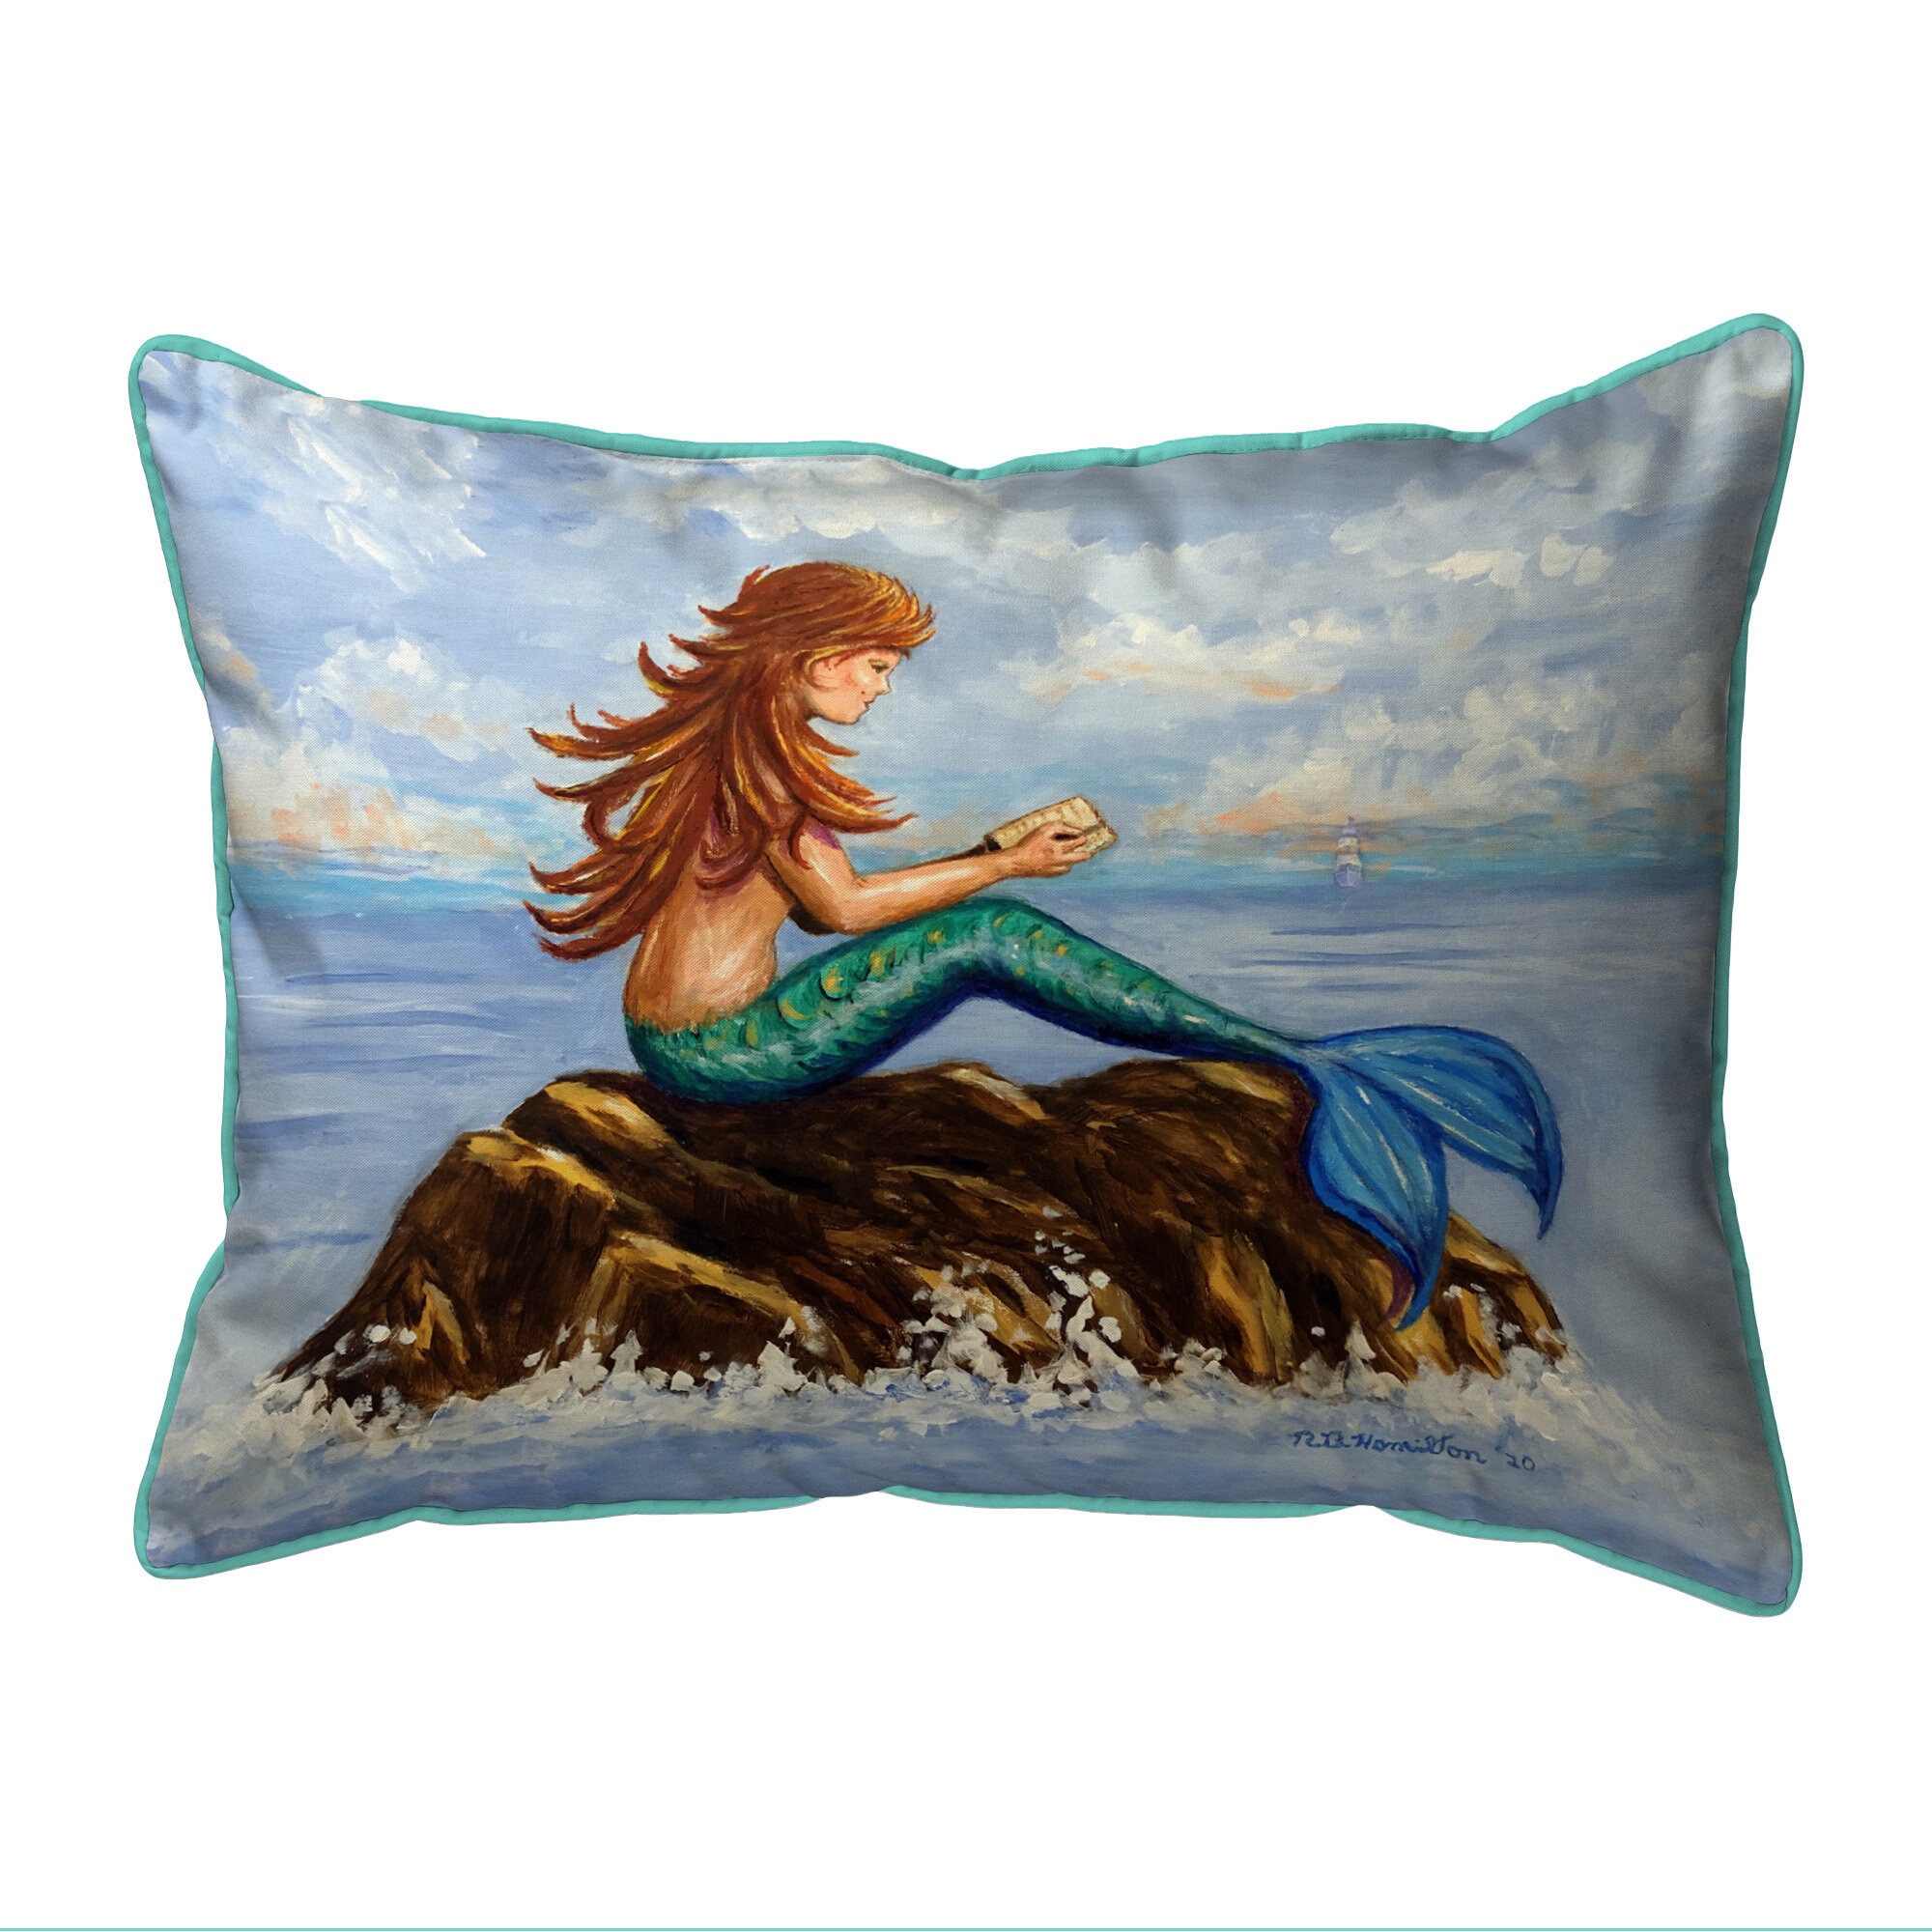 Mermaids Designs Lampshades Ideal To Match Mermaids Cushions & Covers. 